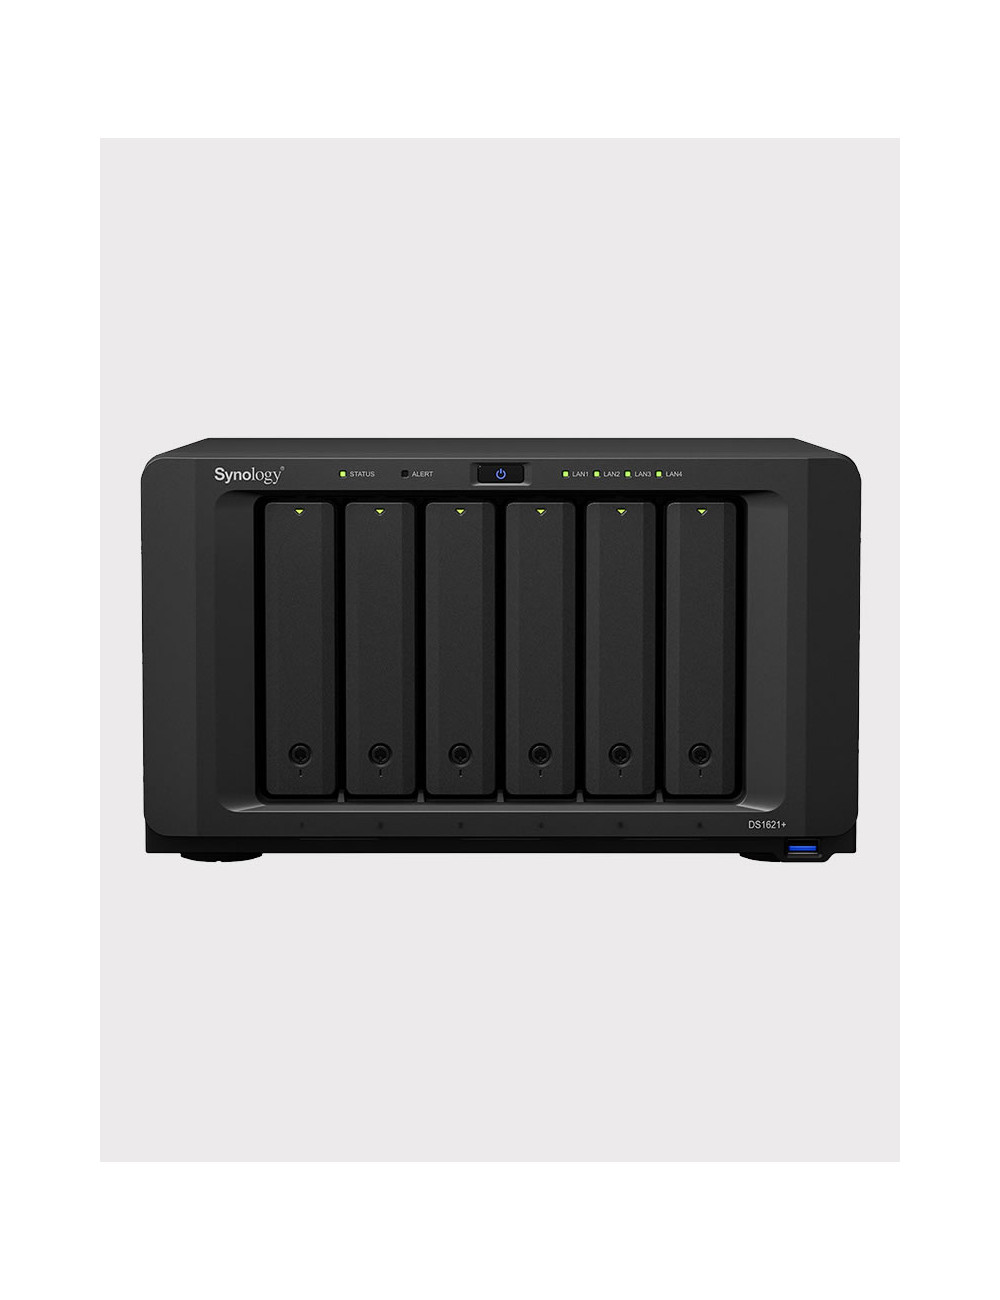 Synology DX517 Unité d'extension IRONWOLF 15To (5x3To)